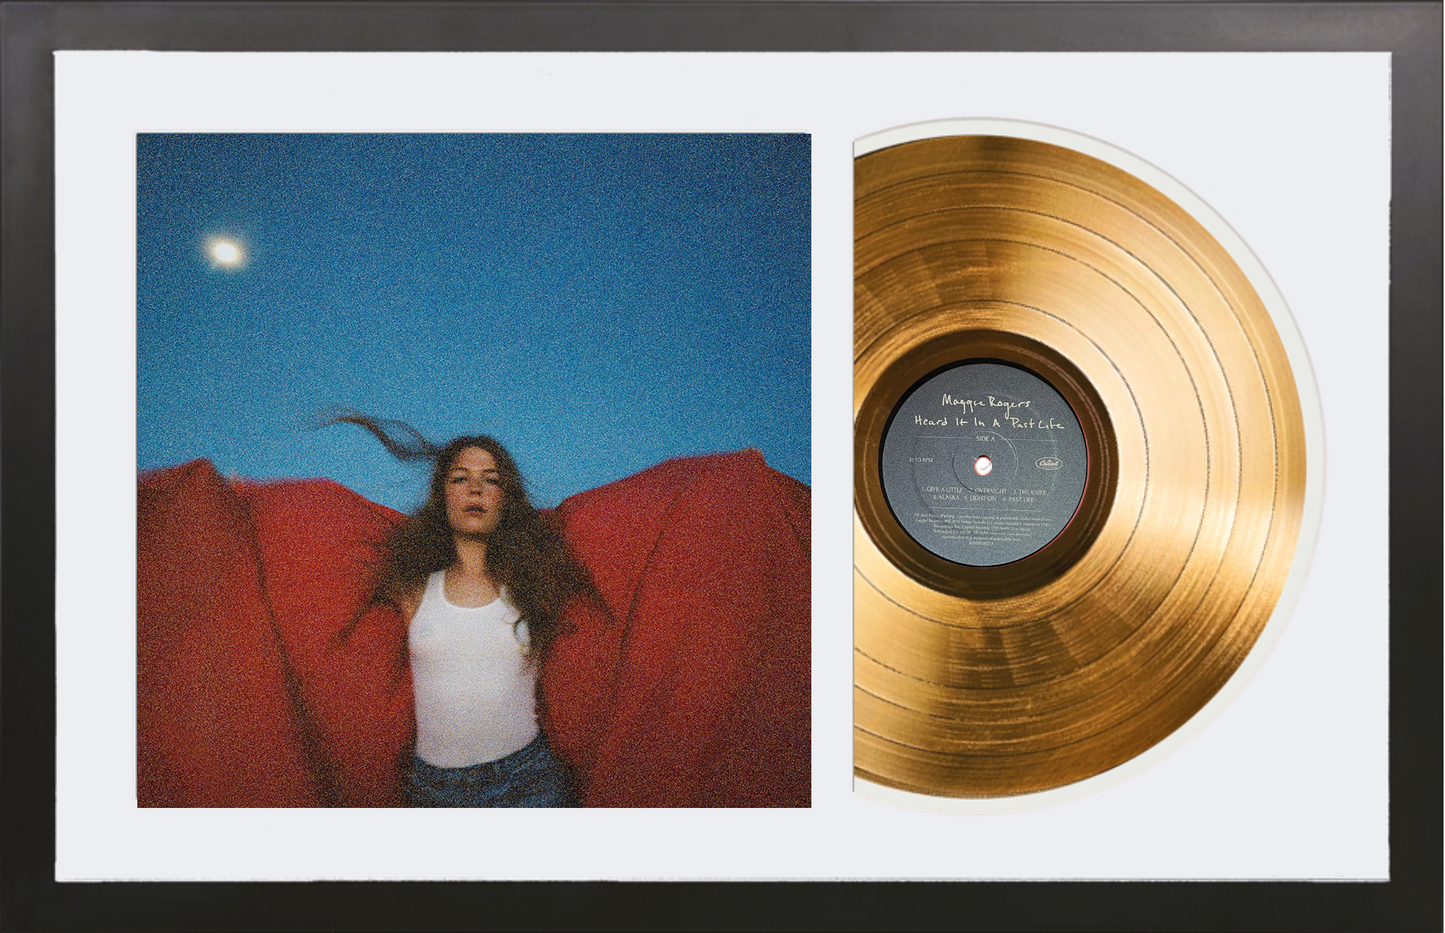 Maggie Rogers - Heard It In a Past Life - Limited Edition, 14K Gold Album